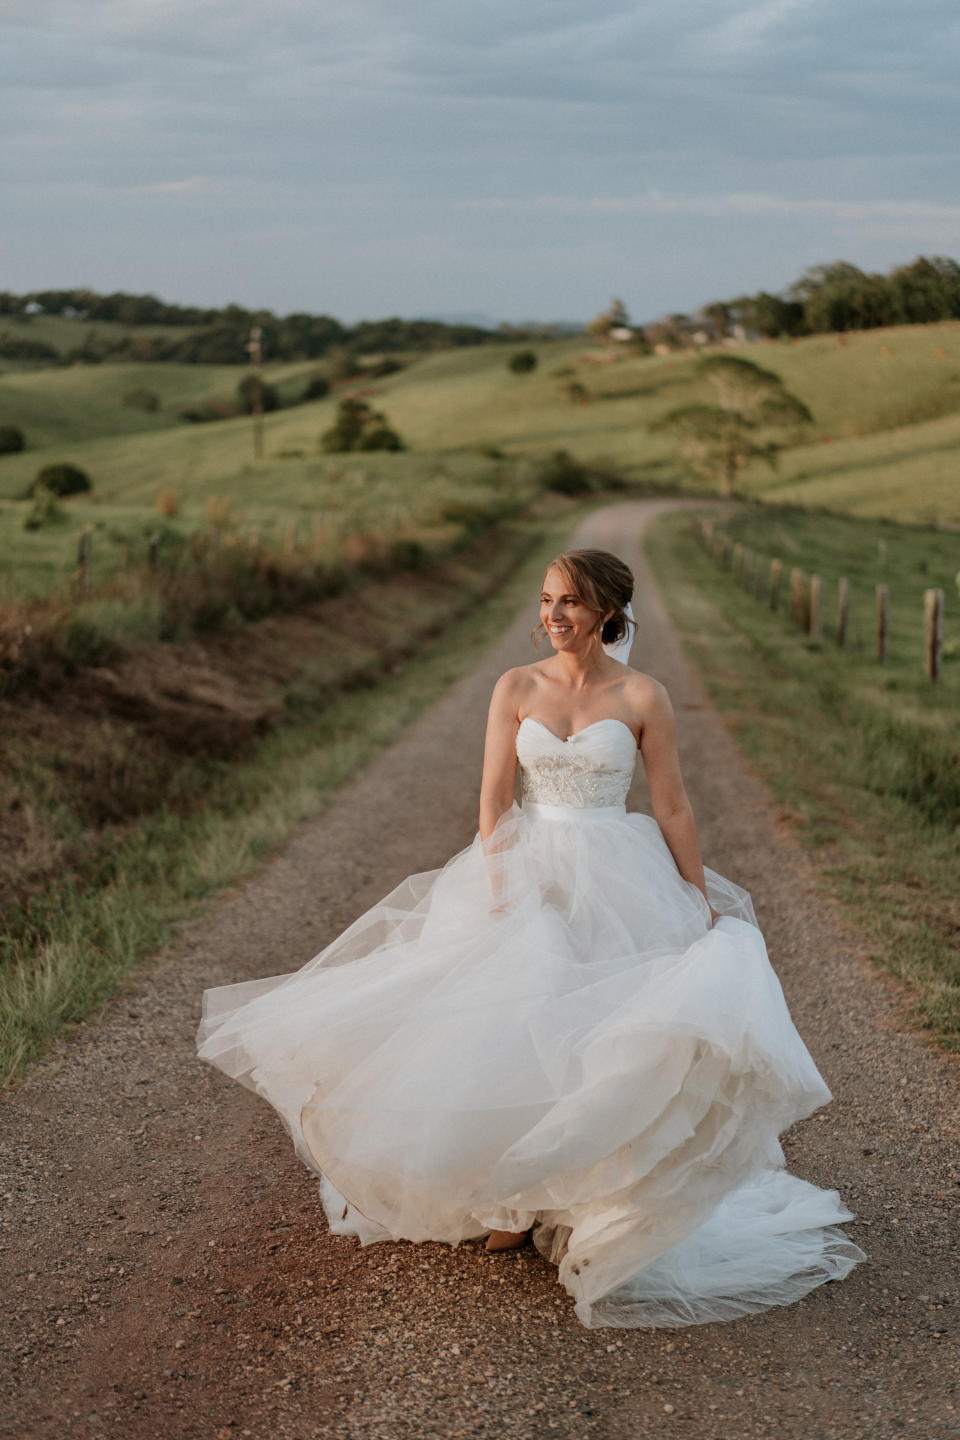 The bride, standing on a dirt road between green rolling hills, smiles as she plays with the skirt of her ball gown.&nbsp; (Photo: <a href="https://www.jamesday.com.au/" target="_blank">James Day Photography</a>)